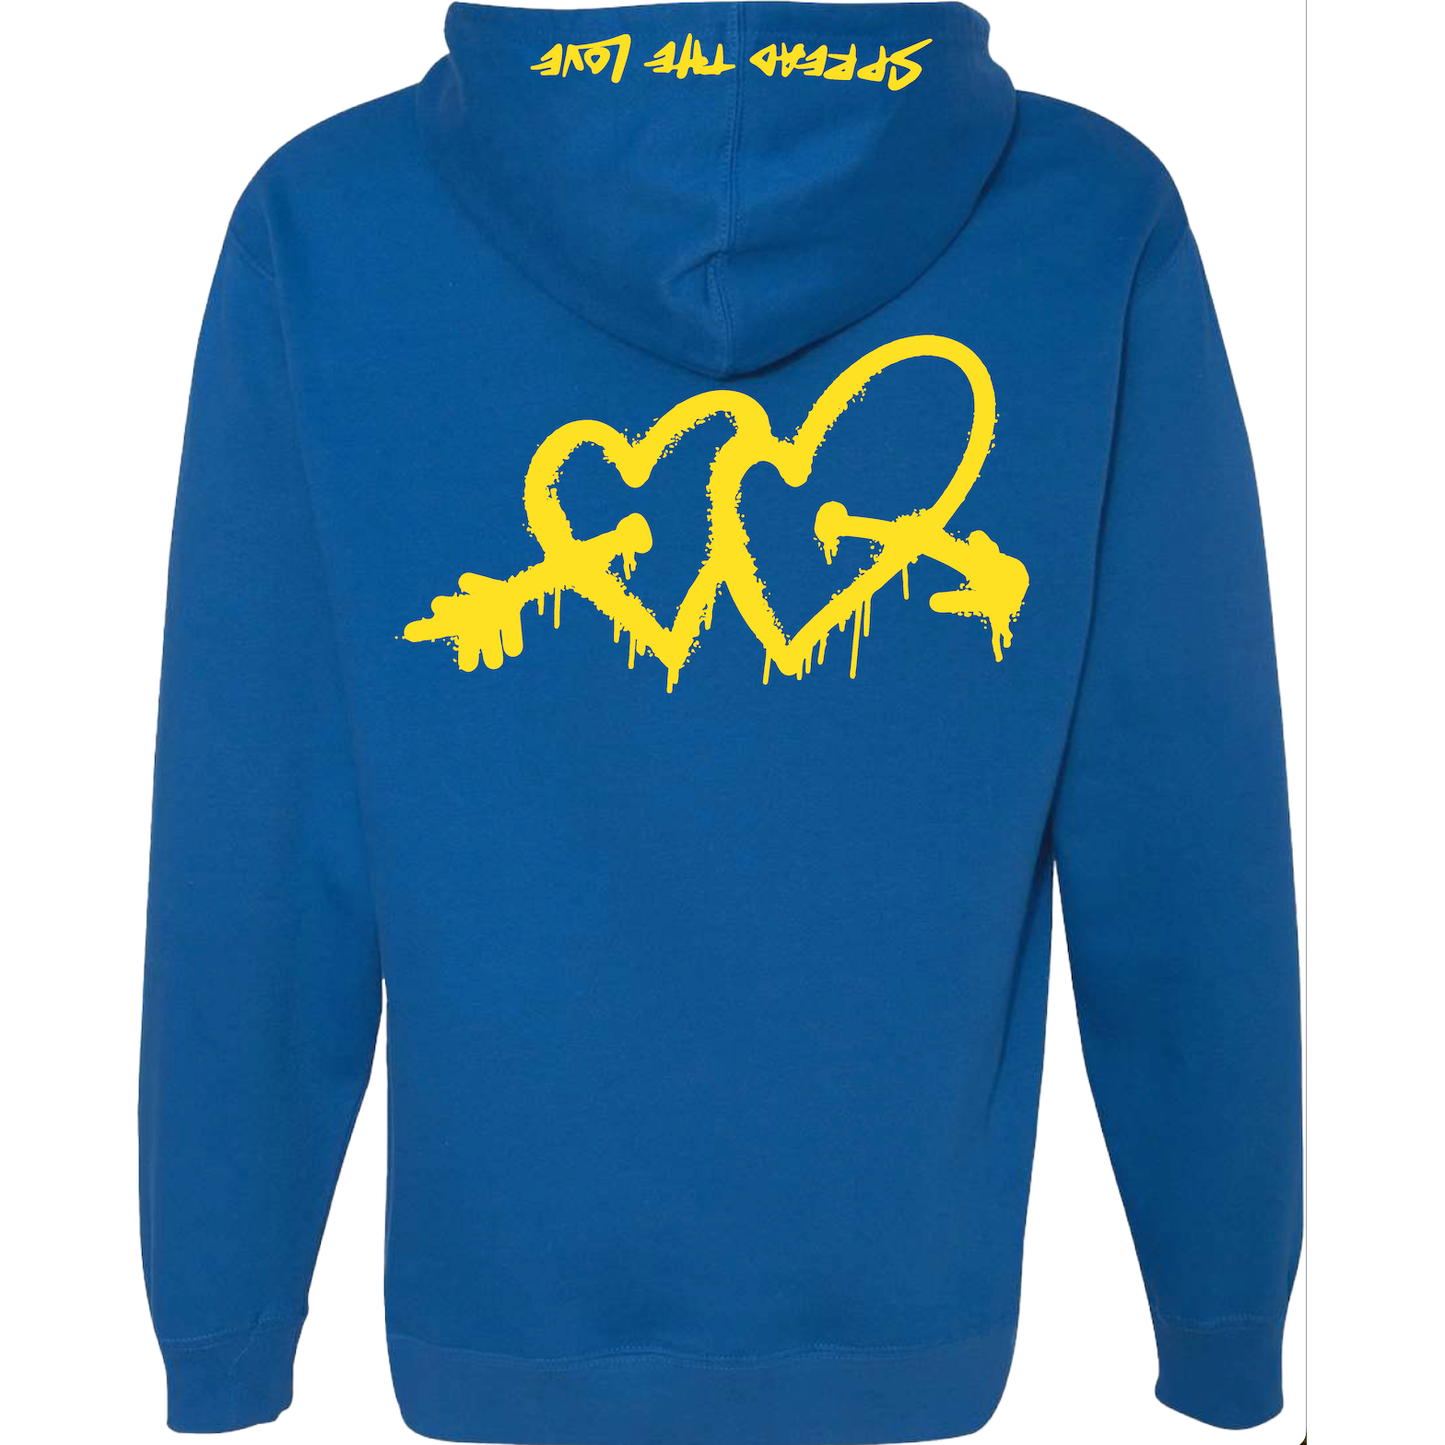 First Edition AC3 Royal Blue Hoodie